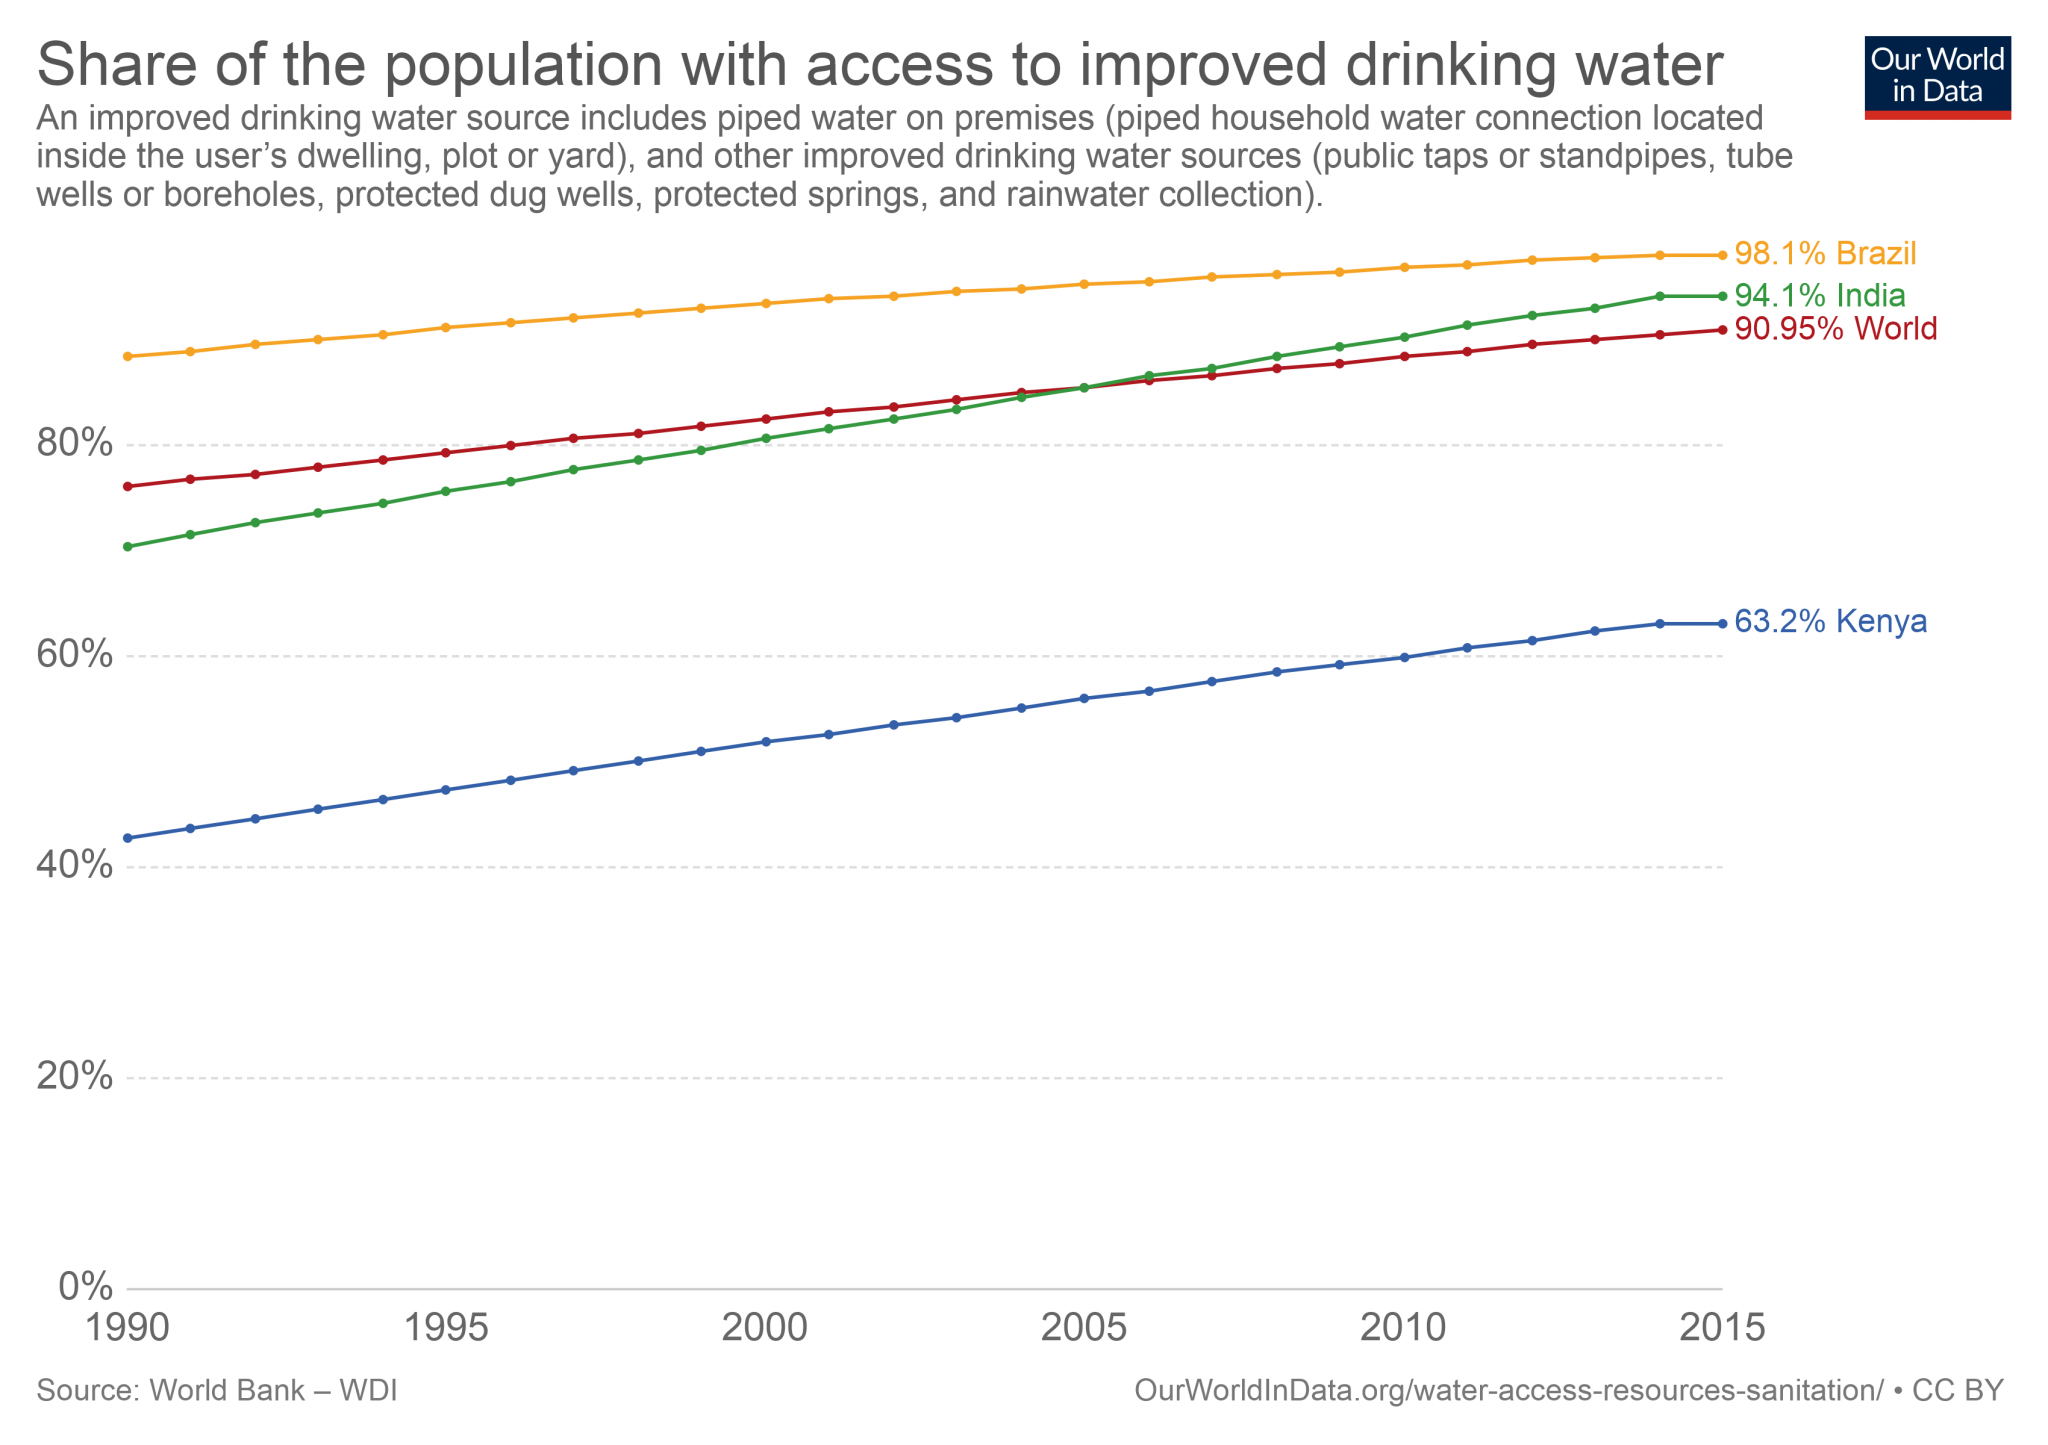 share-of-the-population-with-access-to-improved-drinking-water.png